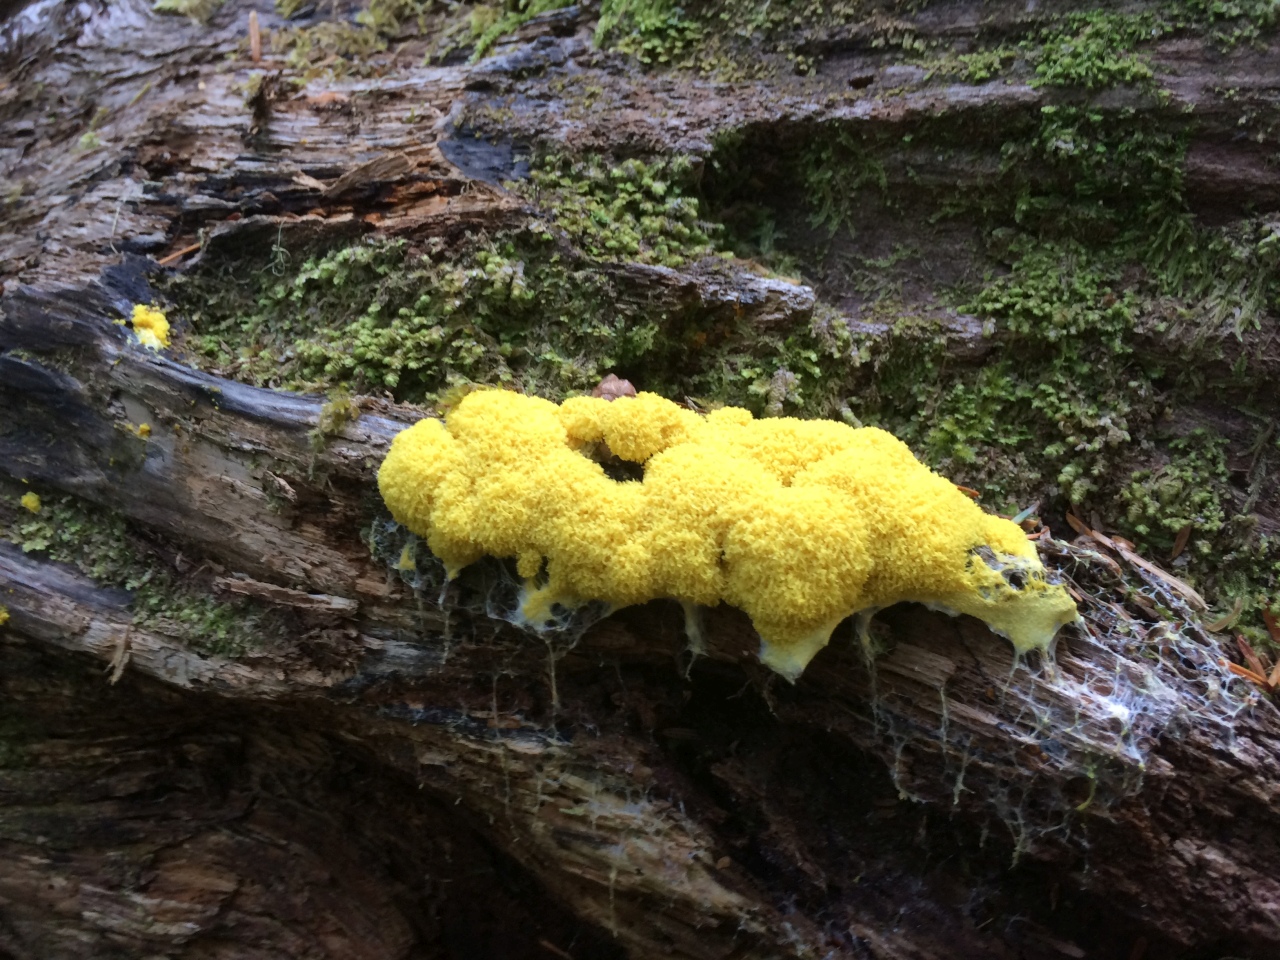 This slime mold, though? Def impressive!